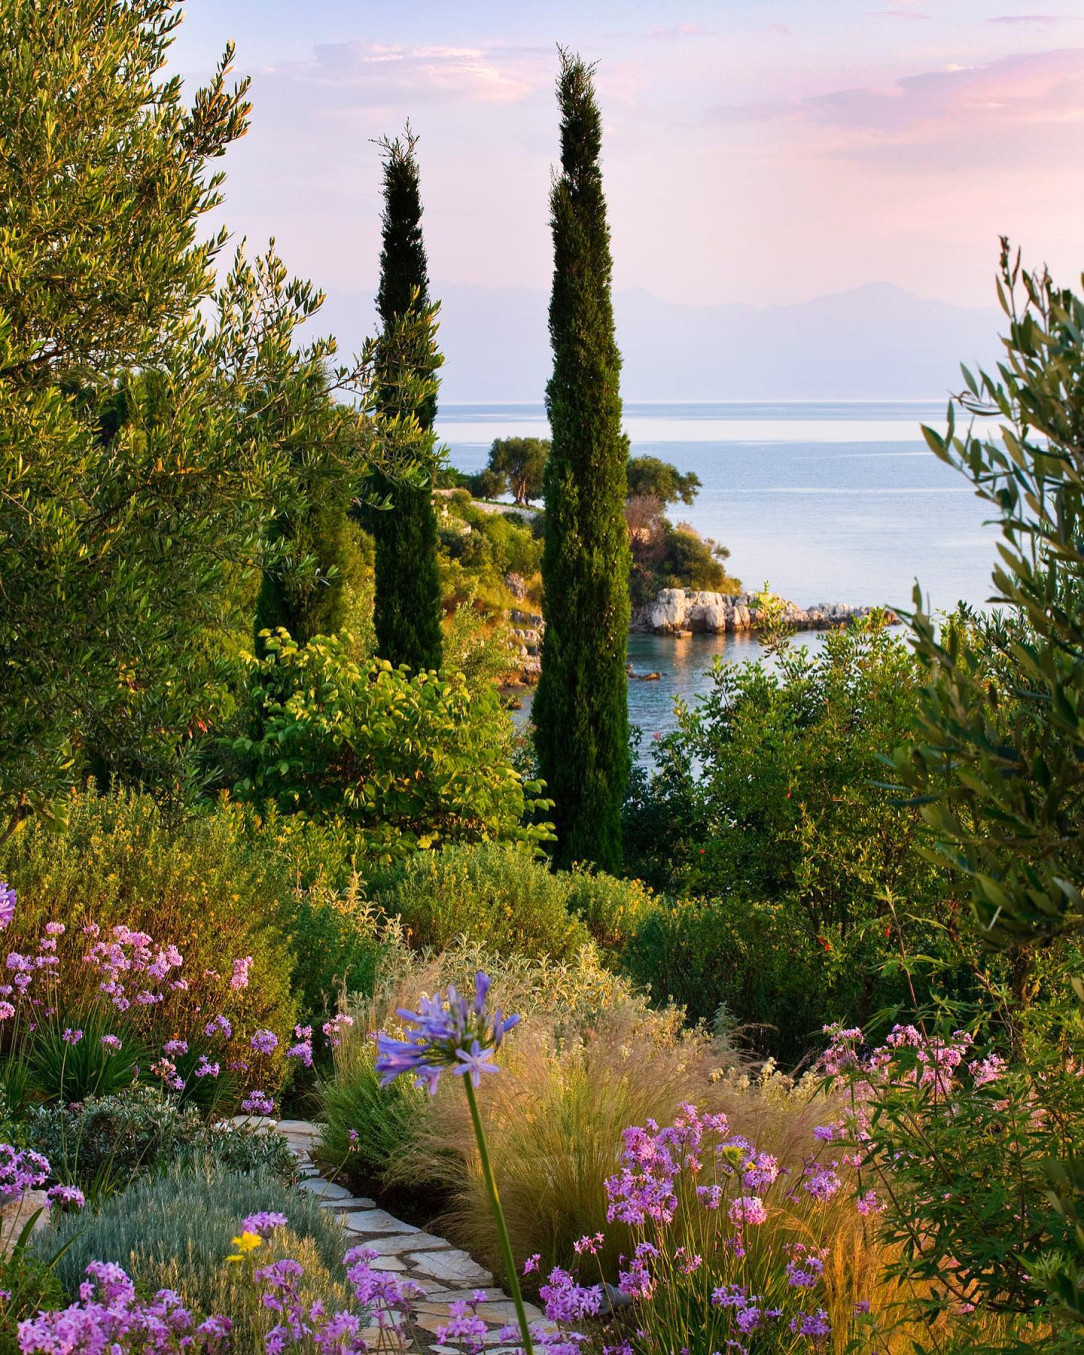 Early-morning view out to sea from the gardens of the Kassiopia estate in Corfu, Greece